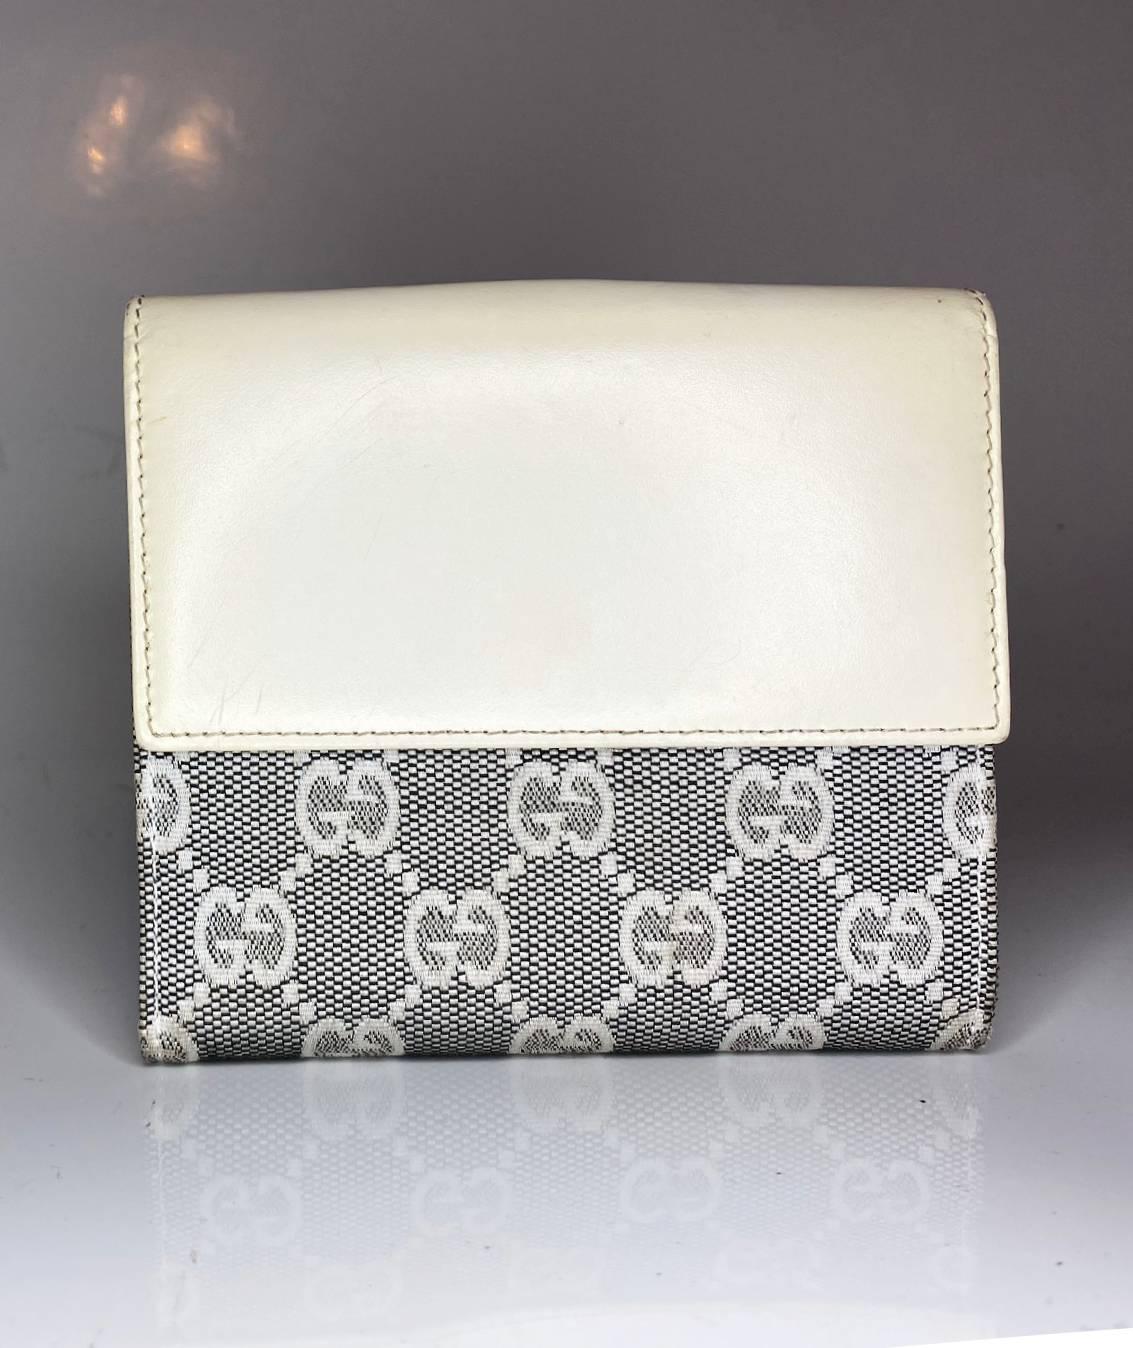 This Gucci Jackie 1961 wallet features a classic grey monogram canvas leather design, a front clutch closure and multiple compartments for cards and coins. Crafted for modern lifestyles, the wallet exudes an elegant, timeless aesthetic, making it